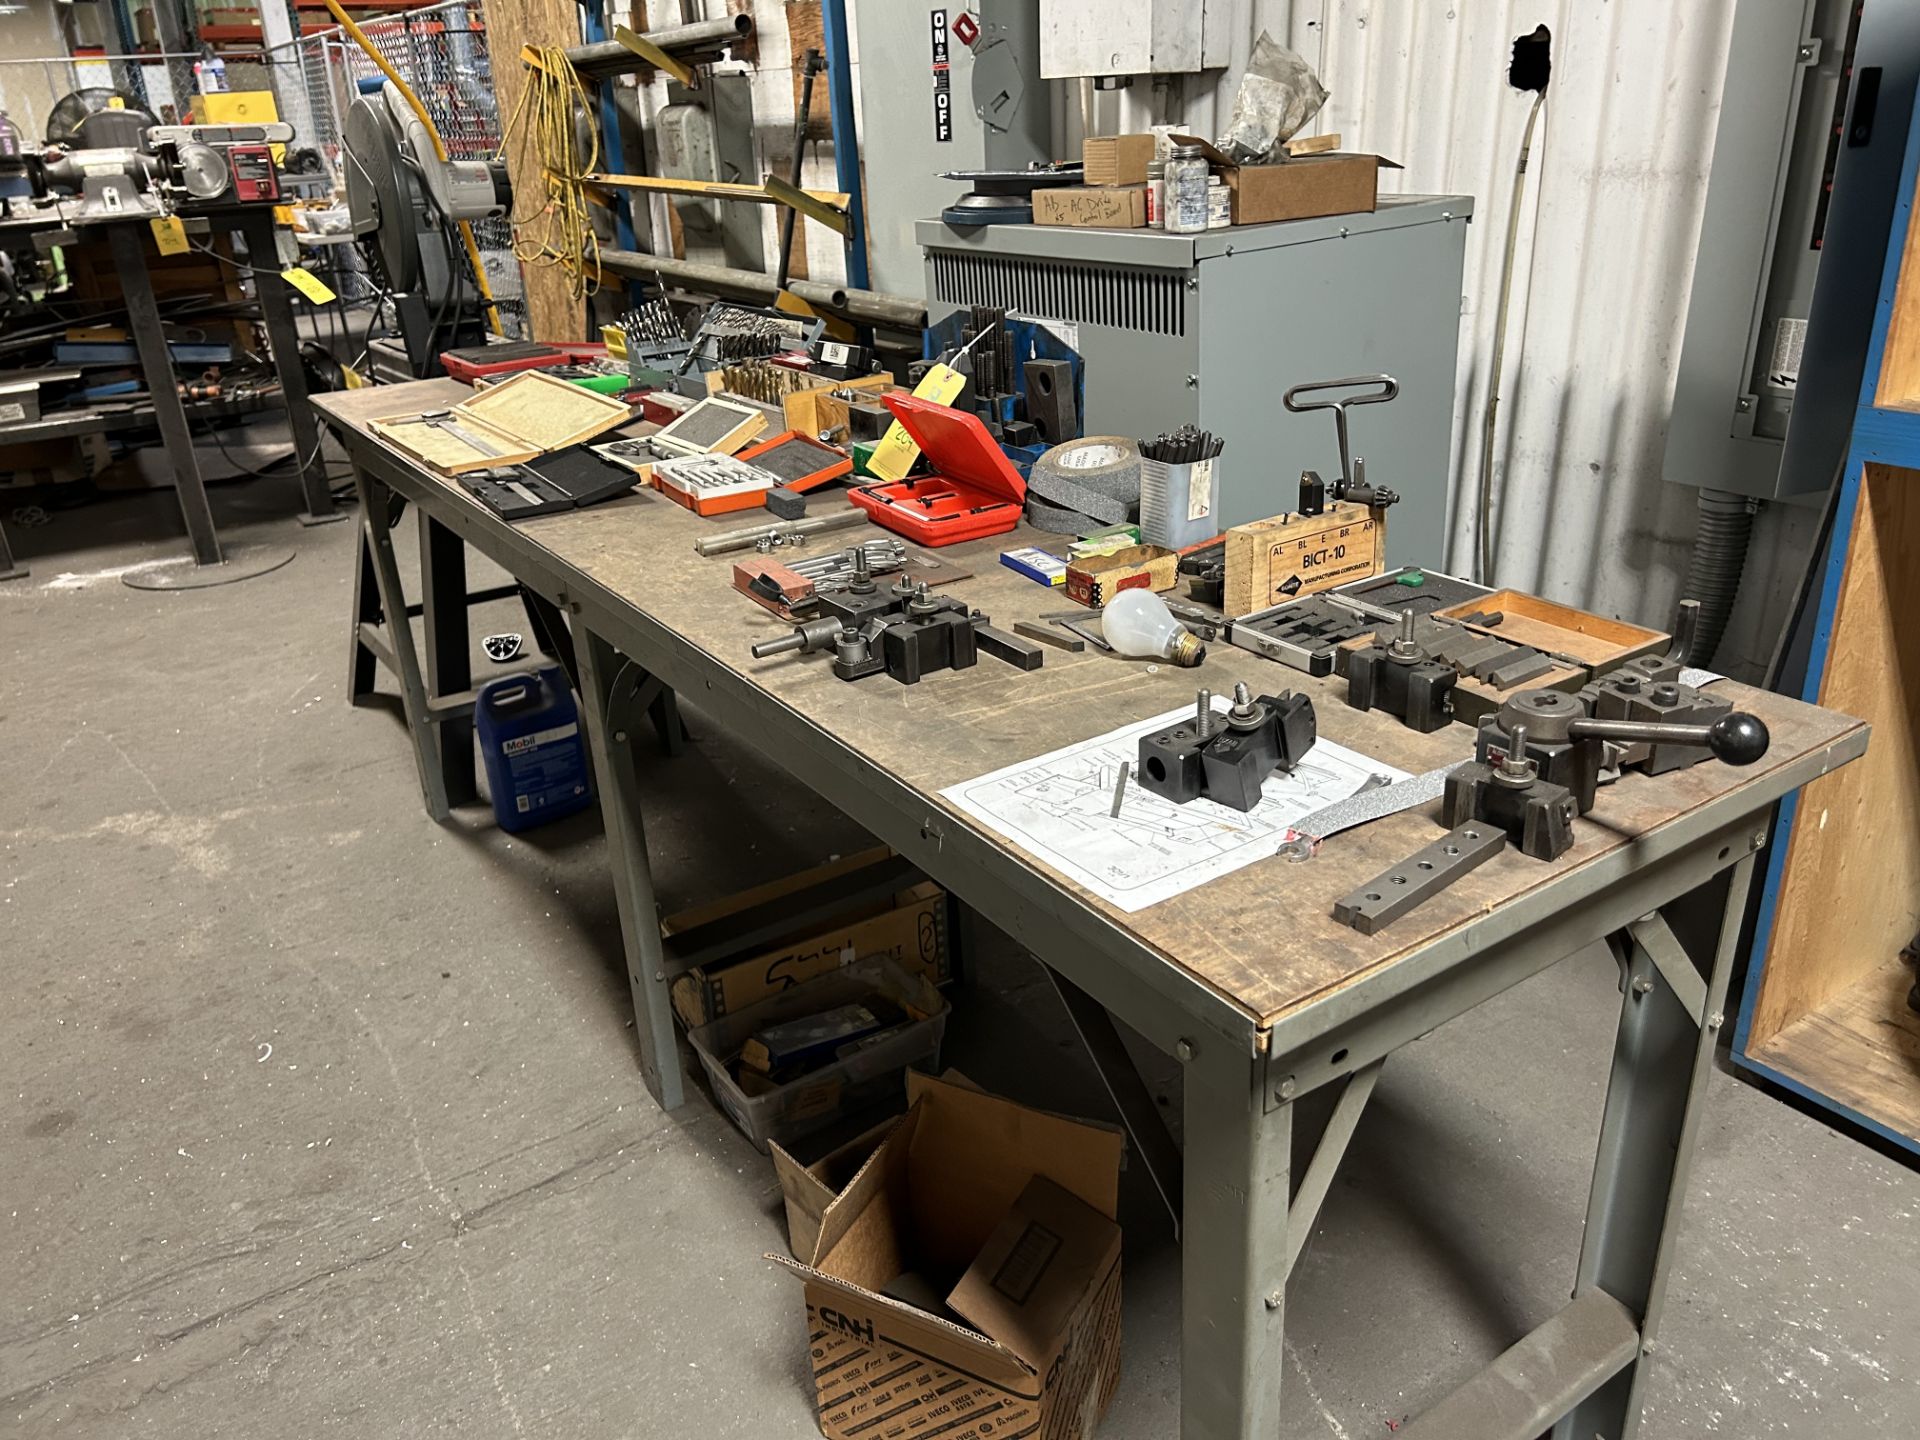 Milling Bits, Hand Tools, Measurement Tools (Does Not Include Table), Rigging/Loading Fee: $30